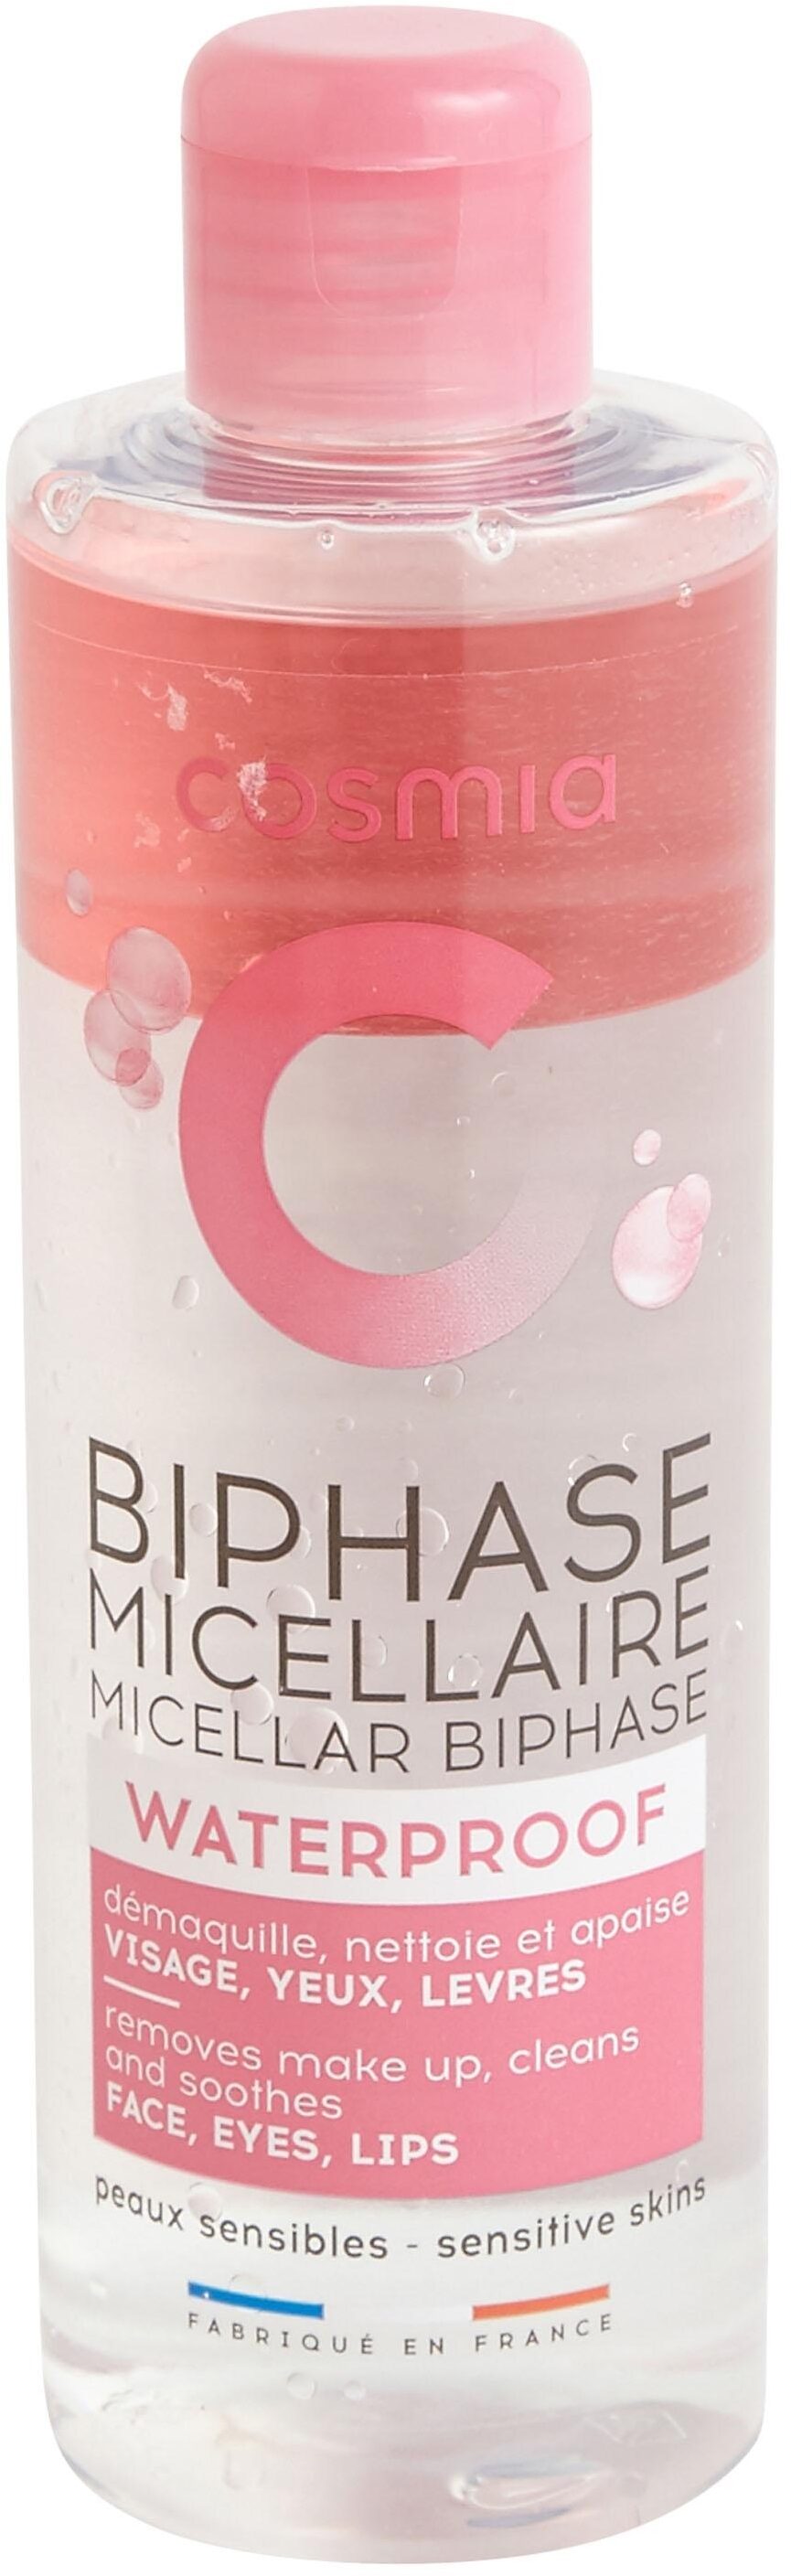 Biphase micellaire waterproof - उत्पाद - fr